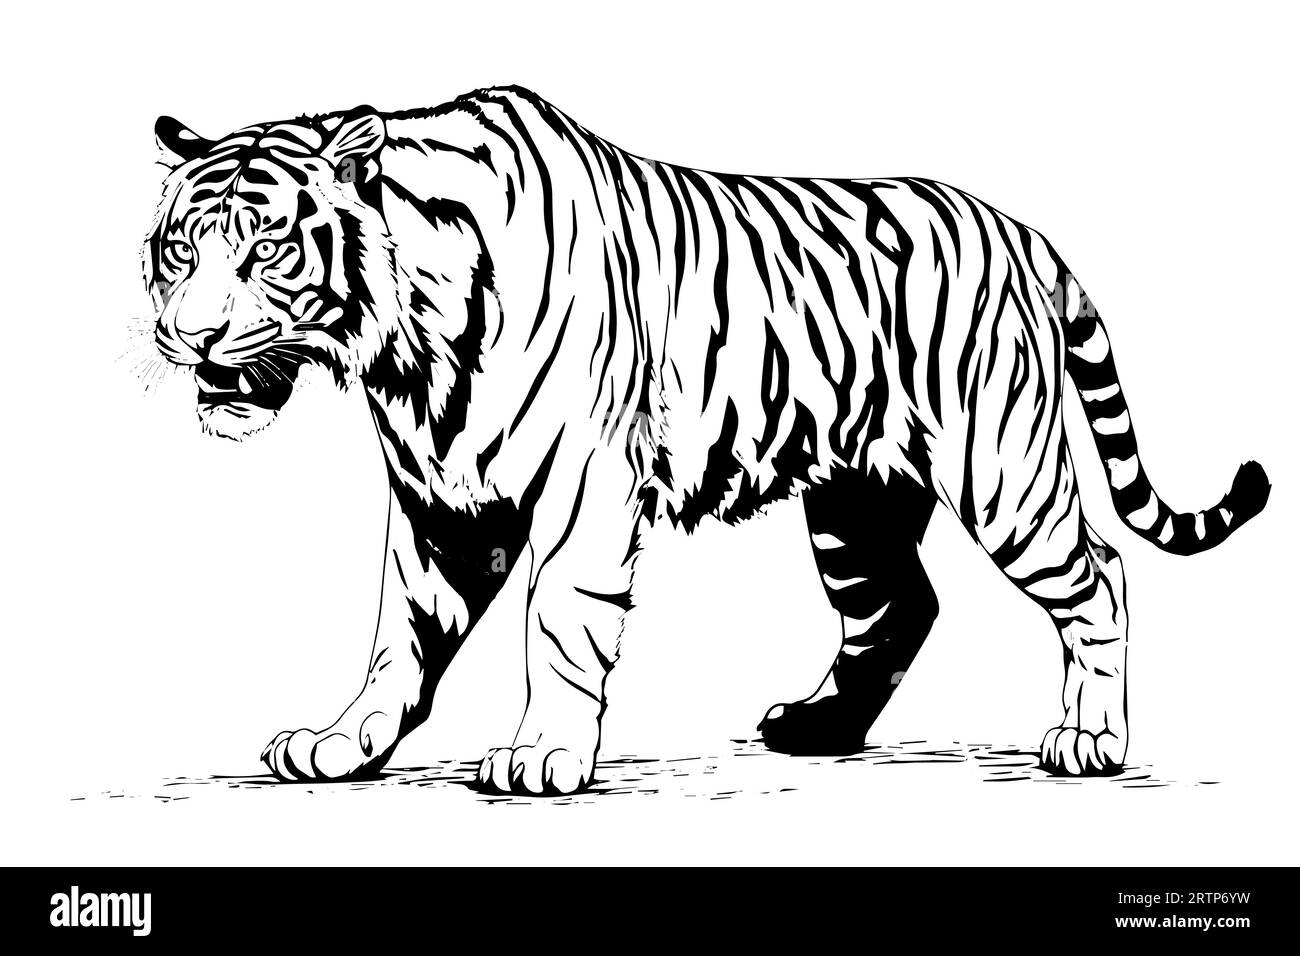 Hand drawn engraving style sketch of a tiger, vector ink illustration ...